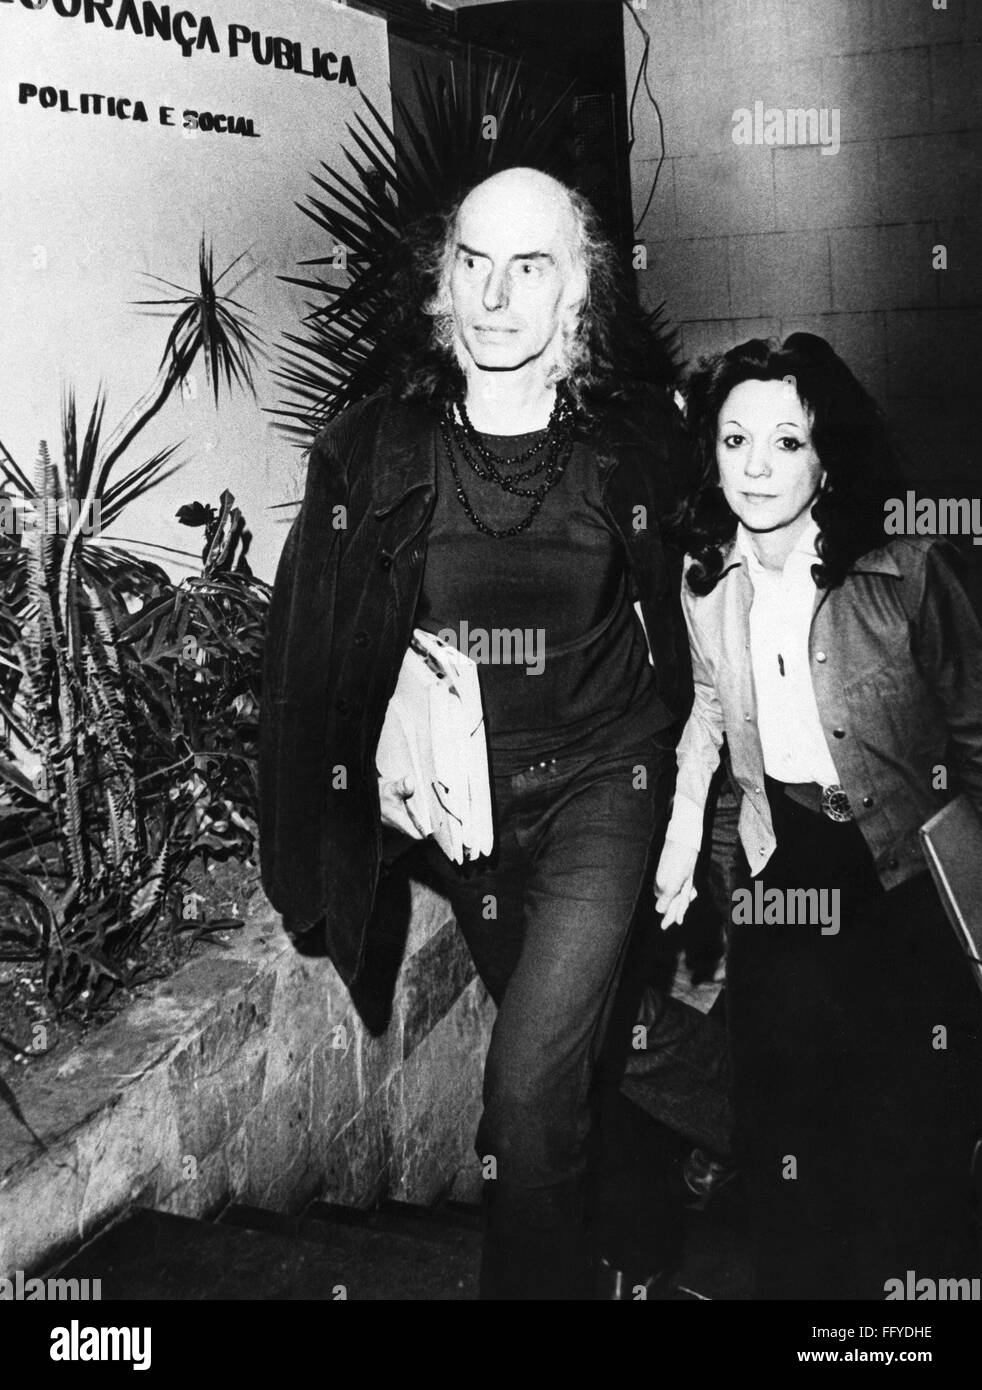 JULIAN BECK (1925-1985). /nAmerican actor, director, poet, and painter. Arriving with his wife, Judith Malina, at political police headquarters in Belo Horizonte, Brazil, after learning that they had been expelled from the country, 27 August 1971. Stock Photo